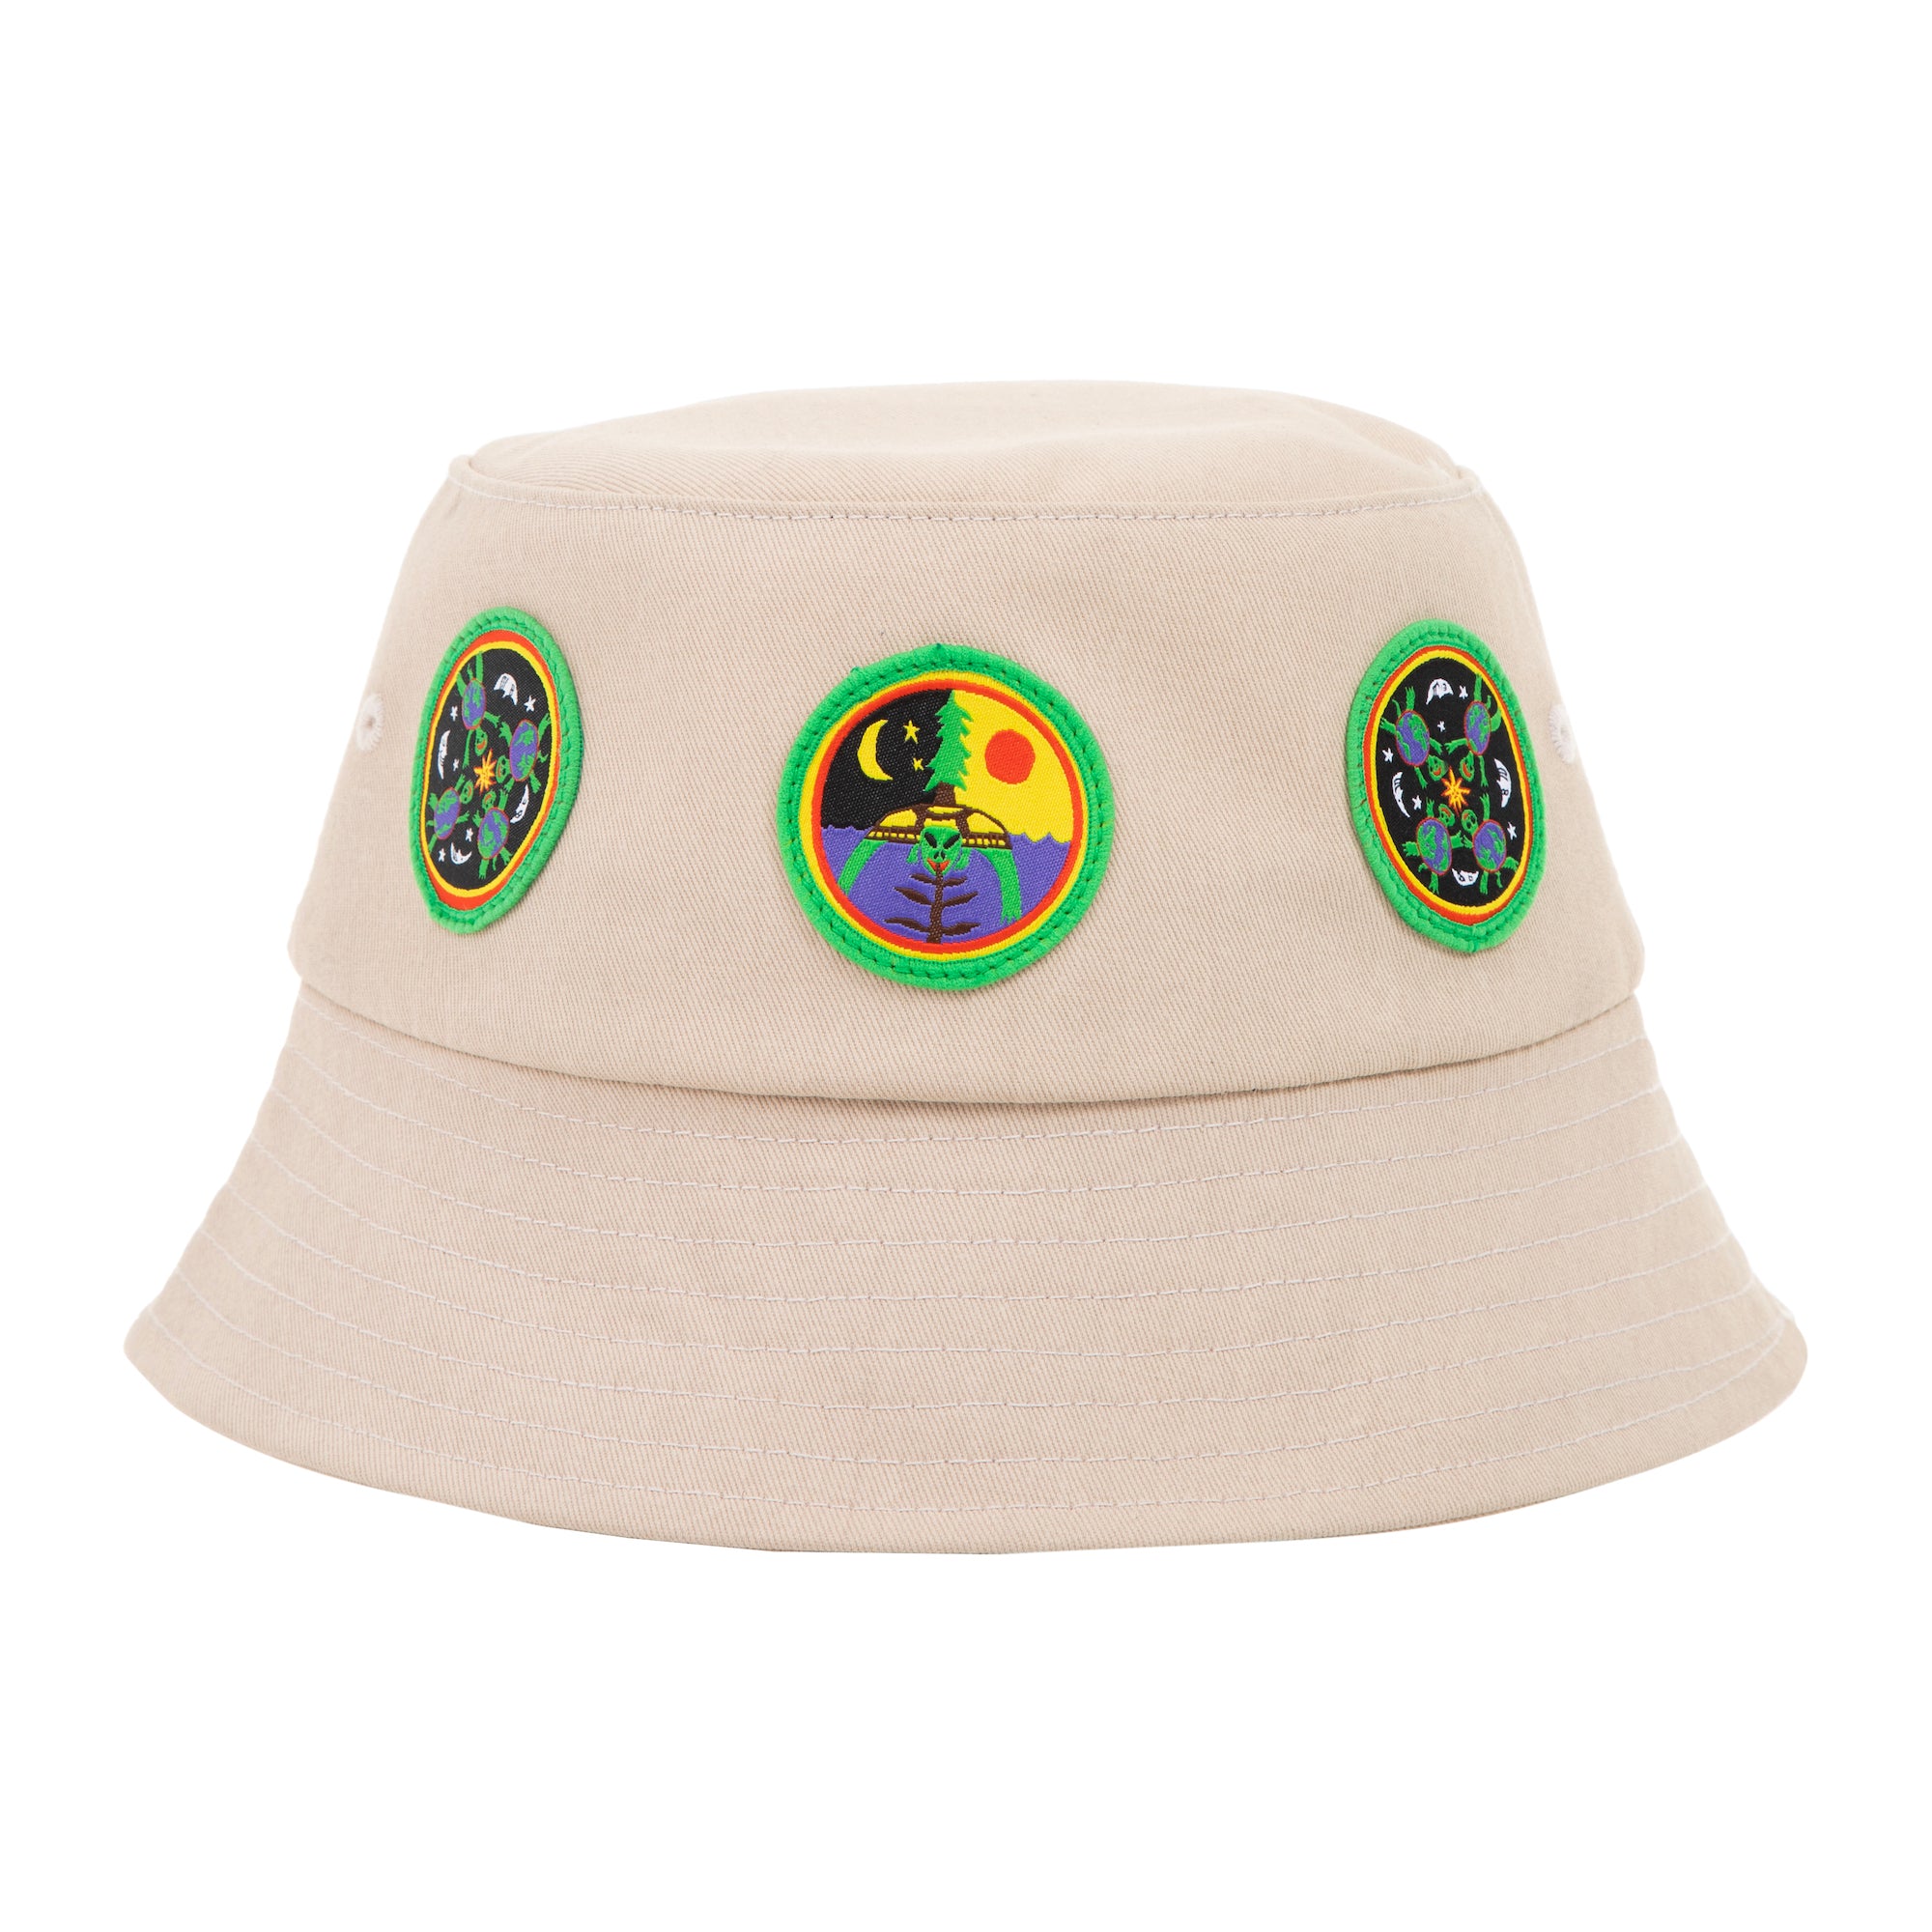 T.I.M.E Patches Bucket Hat